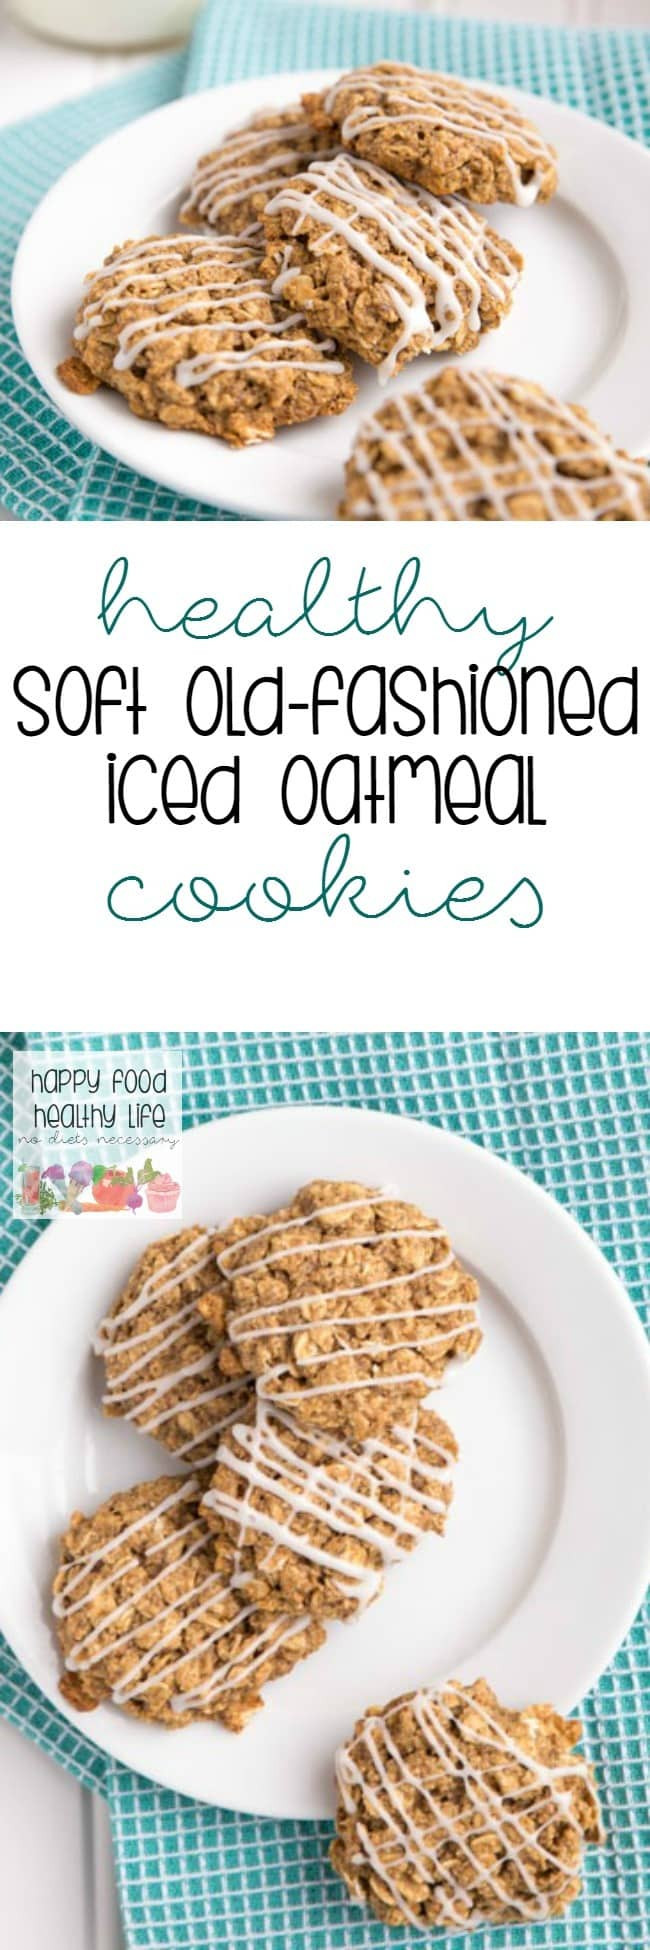 Soft Oatmeal Cookies Healthy
 Healthy Soft Old Fashioned Iced Oatmeal Cookie Recipe